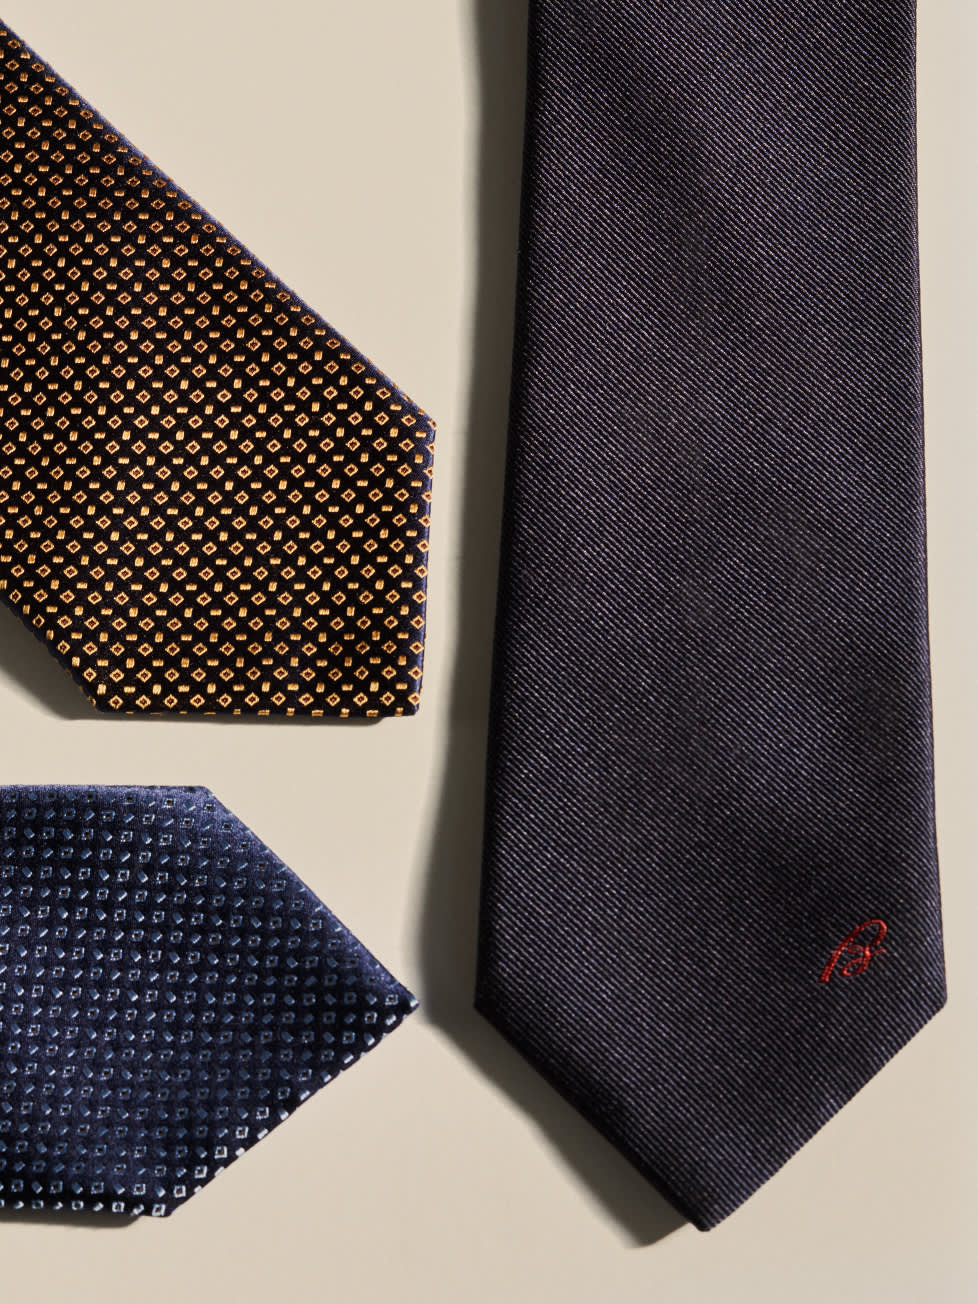 Three Brioni made-to-order ties in different fabrics and patterns